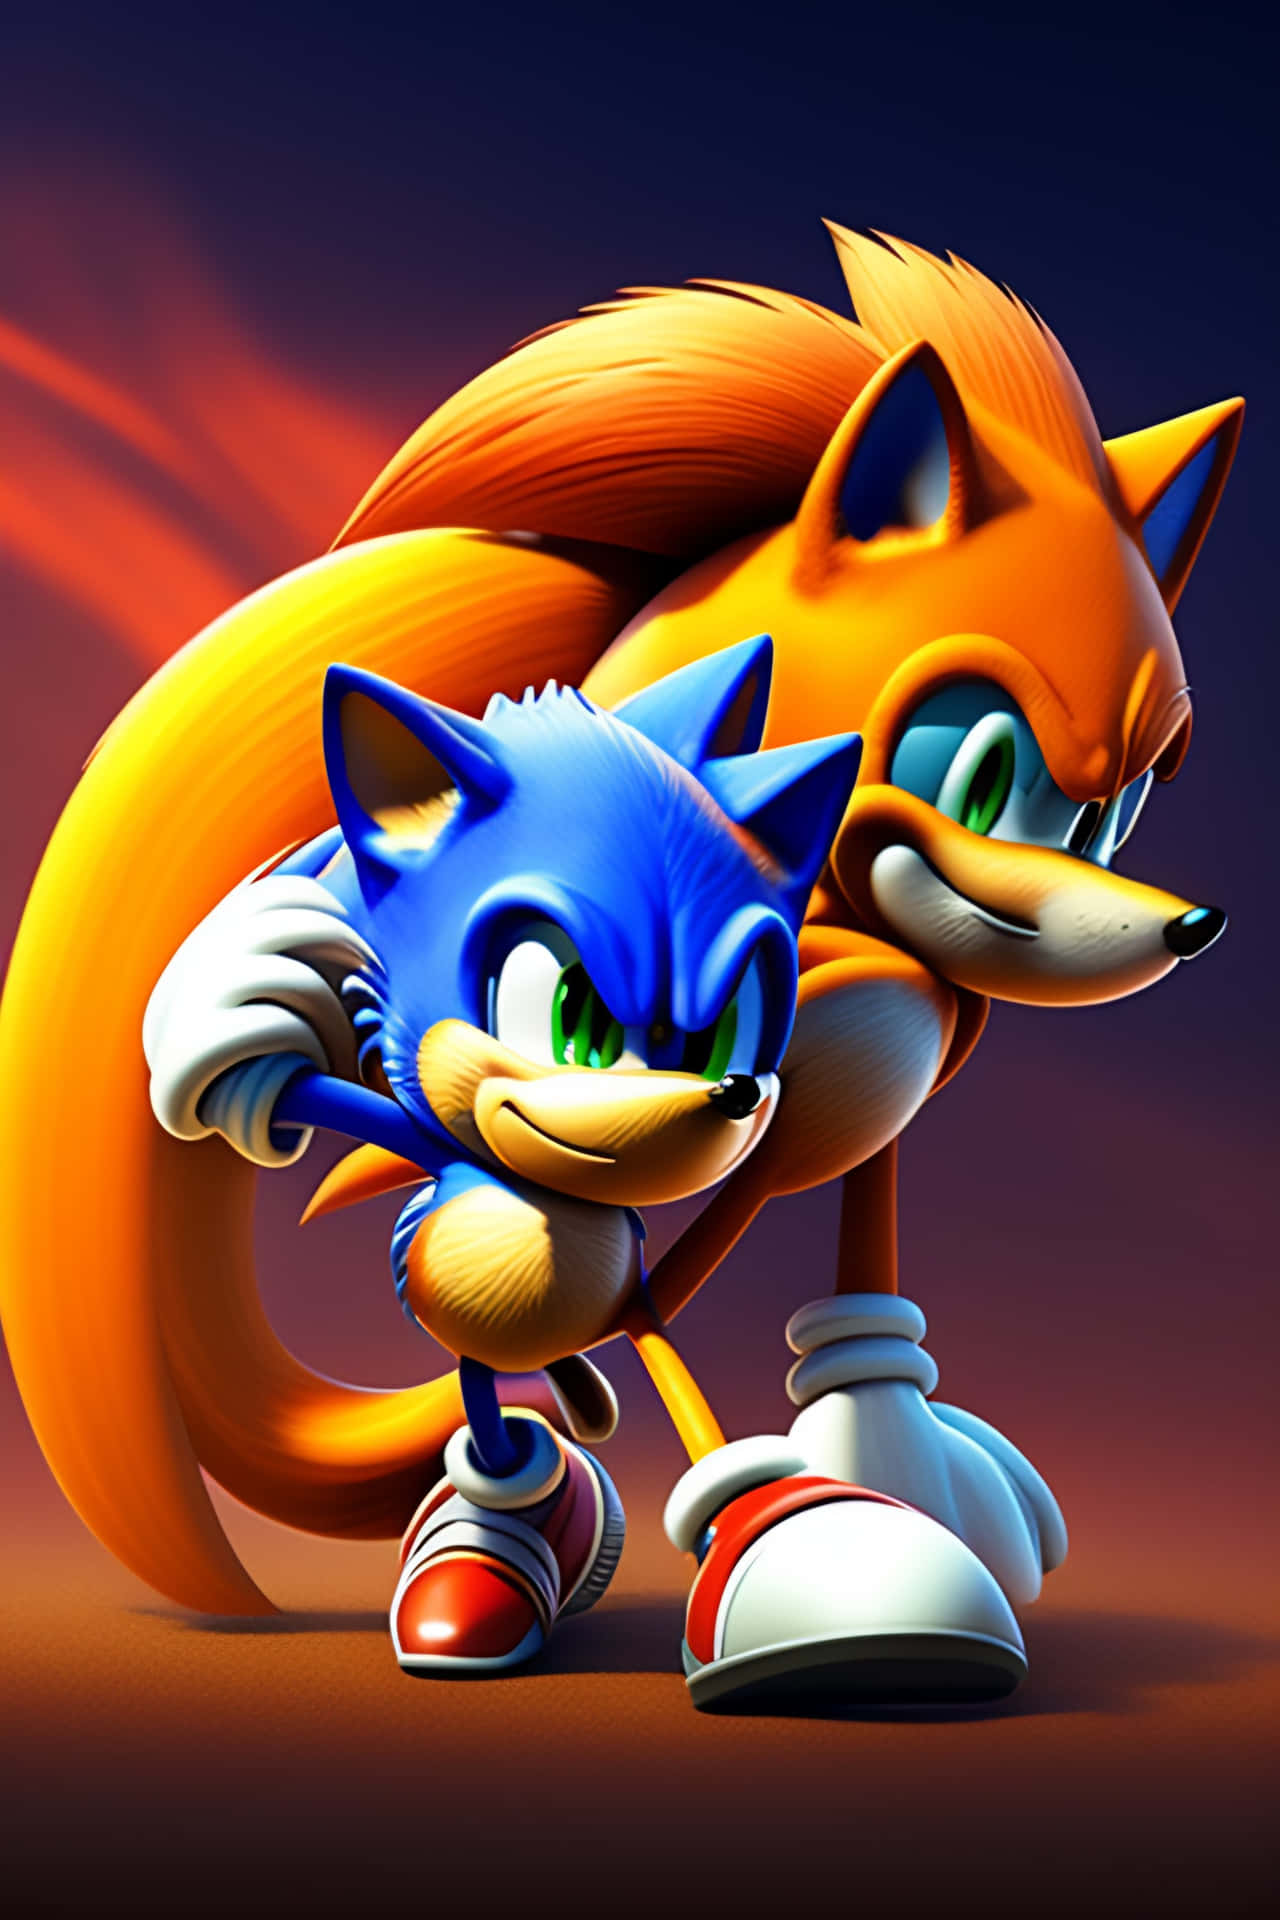 HD wallpaper Tails character Sonic Sonic the Hedgehog birds  laboratories  Wallpaper Flare